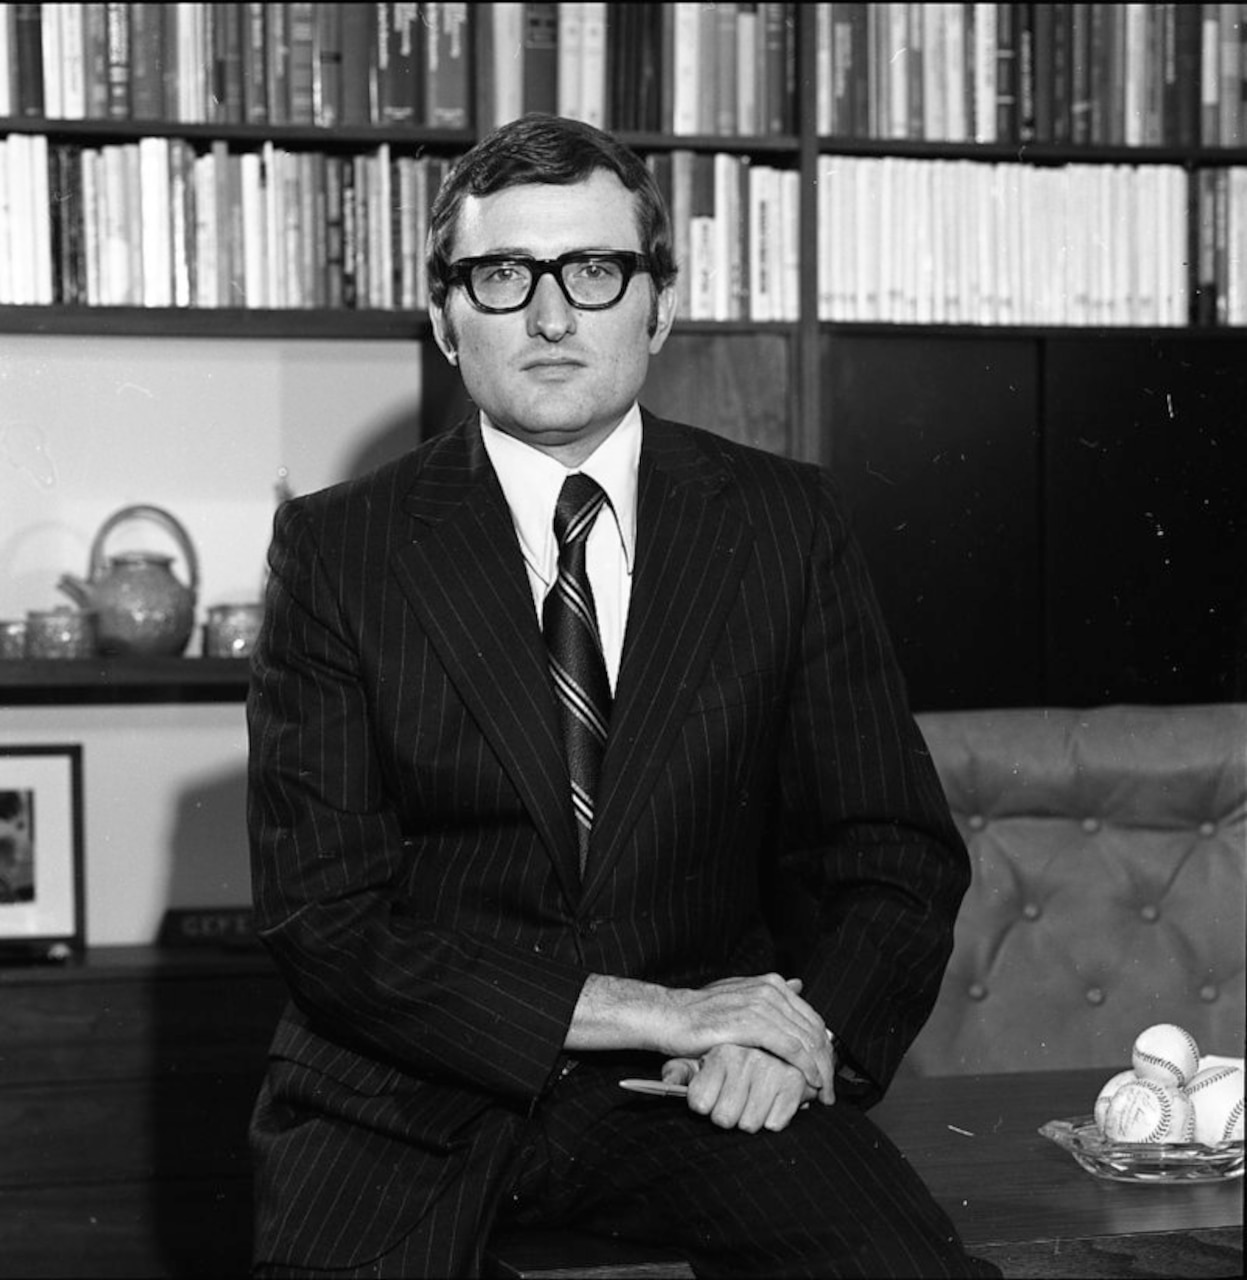 A man wearing a black suit and glasses poses for photo.